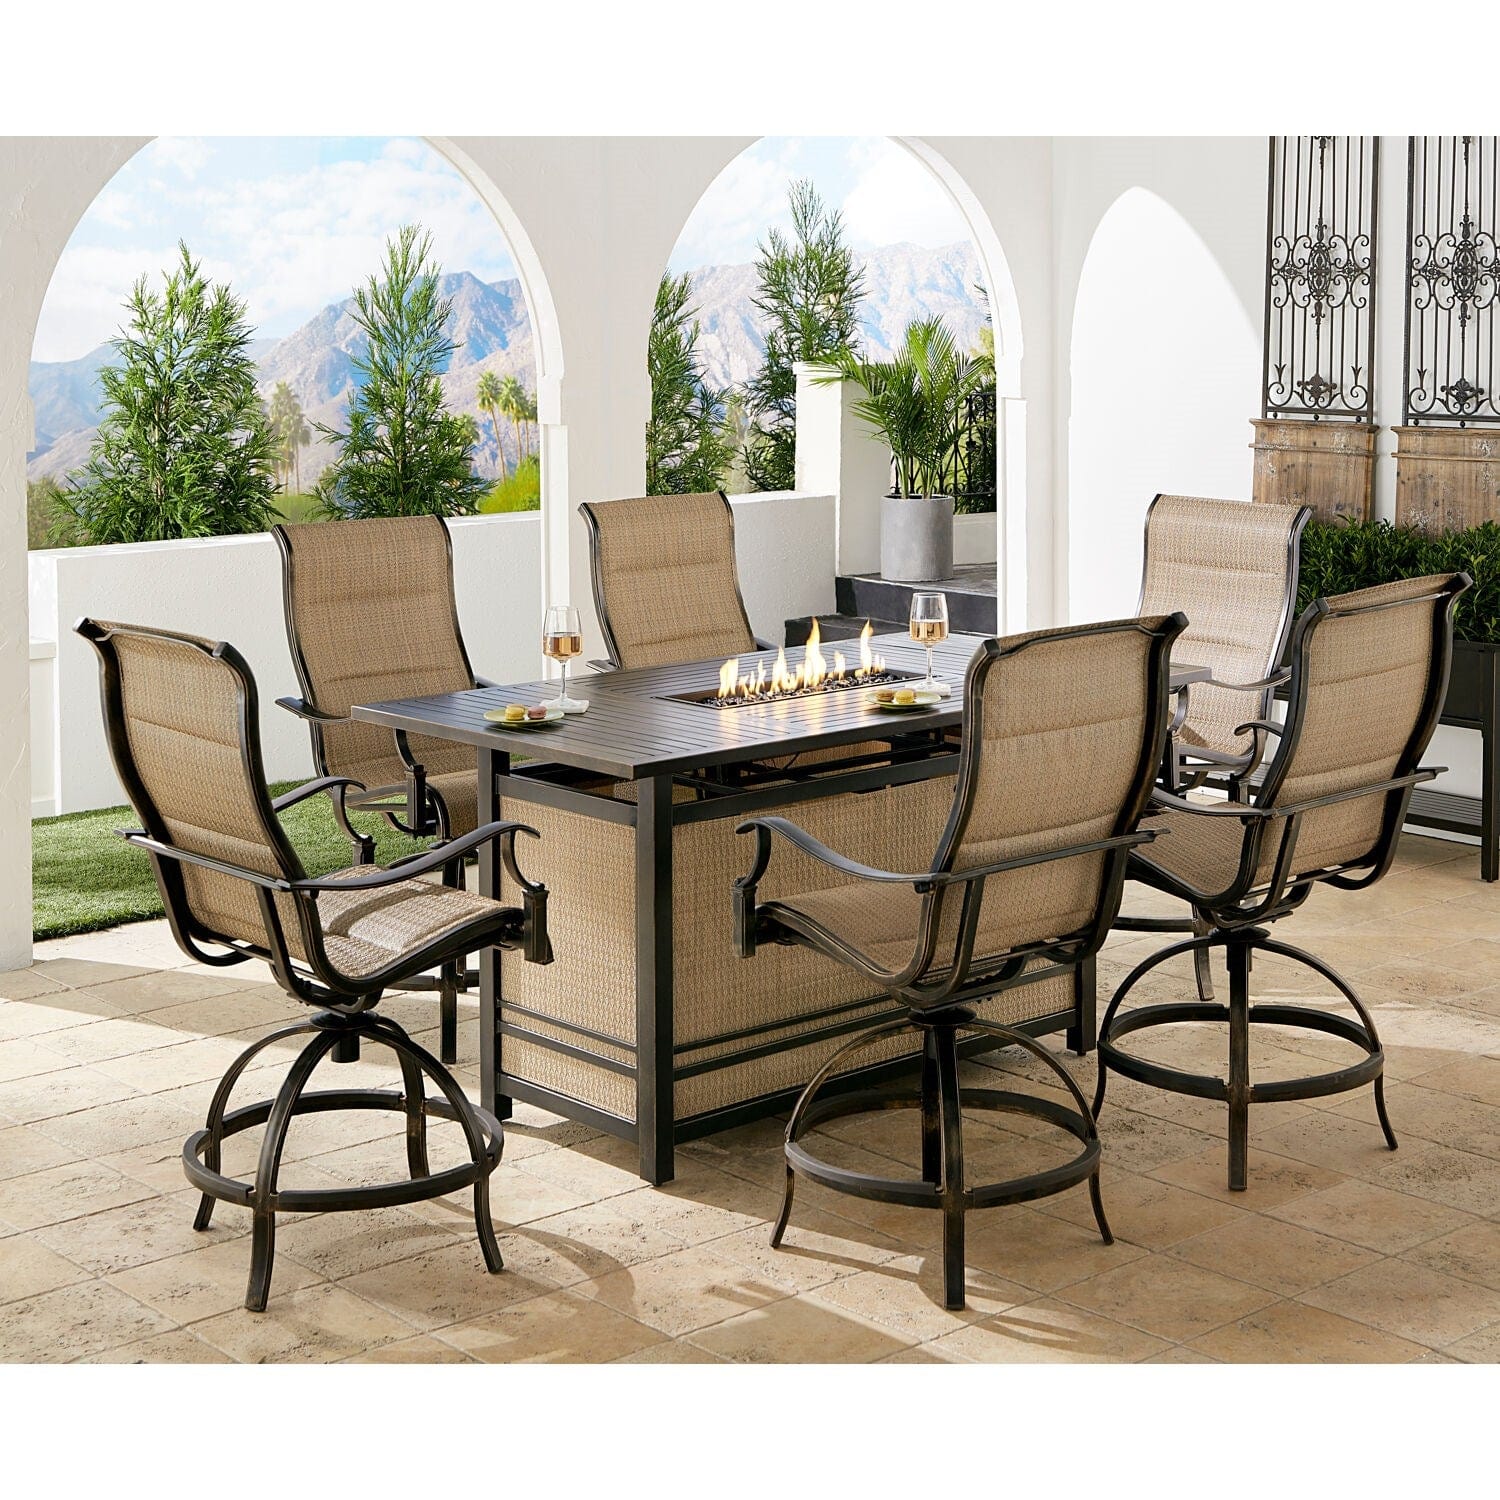 Hanover Fire Pit Dining Set Hanover - Traditions 7-Piece Aluminum Frame High-Dining Set in Tan with 6 Padded Counter-Height Swivel Chairs and a 30,000 BTU Fire Pit Dining Table | TRAD7PCPFPDBR-TAN